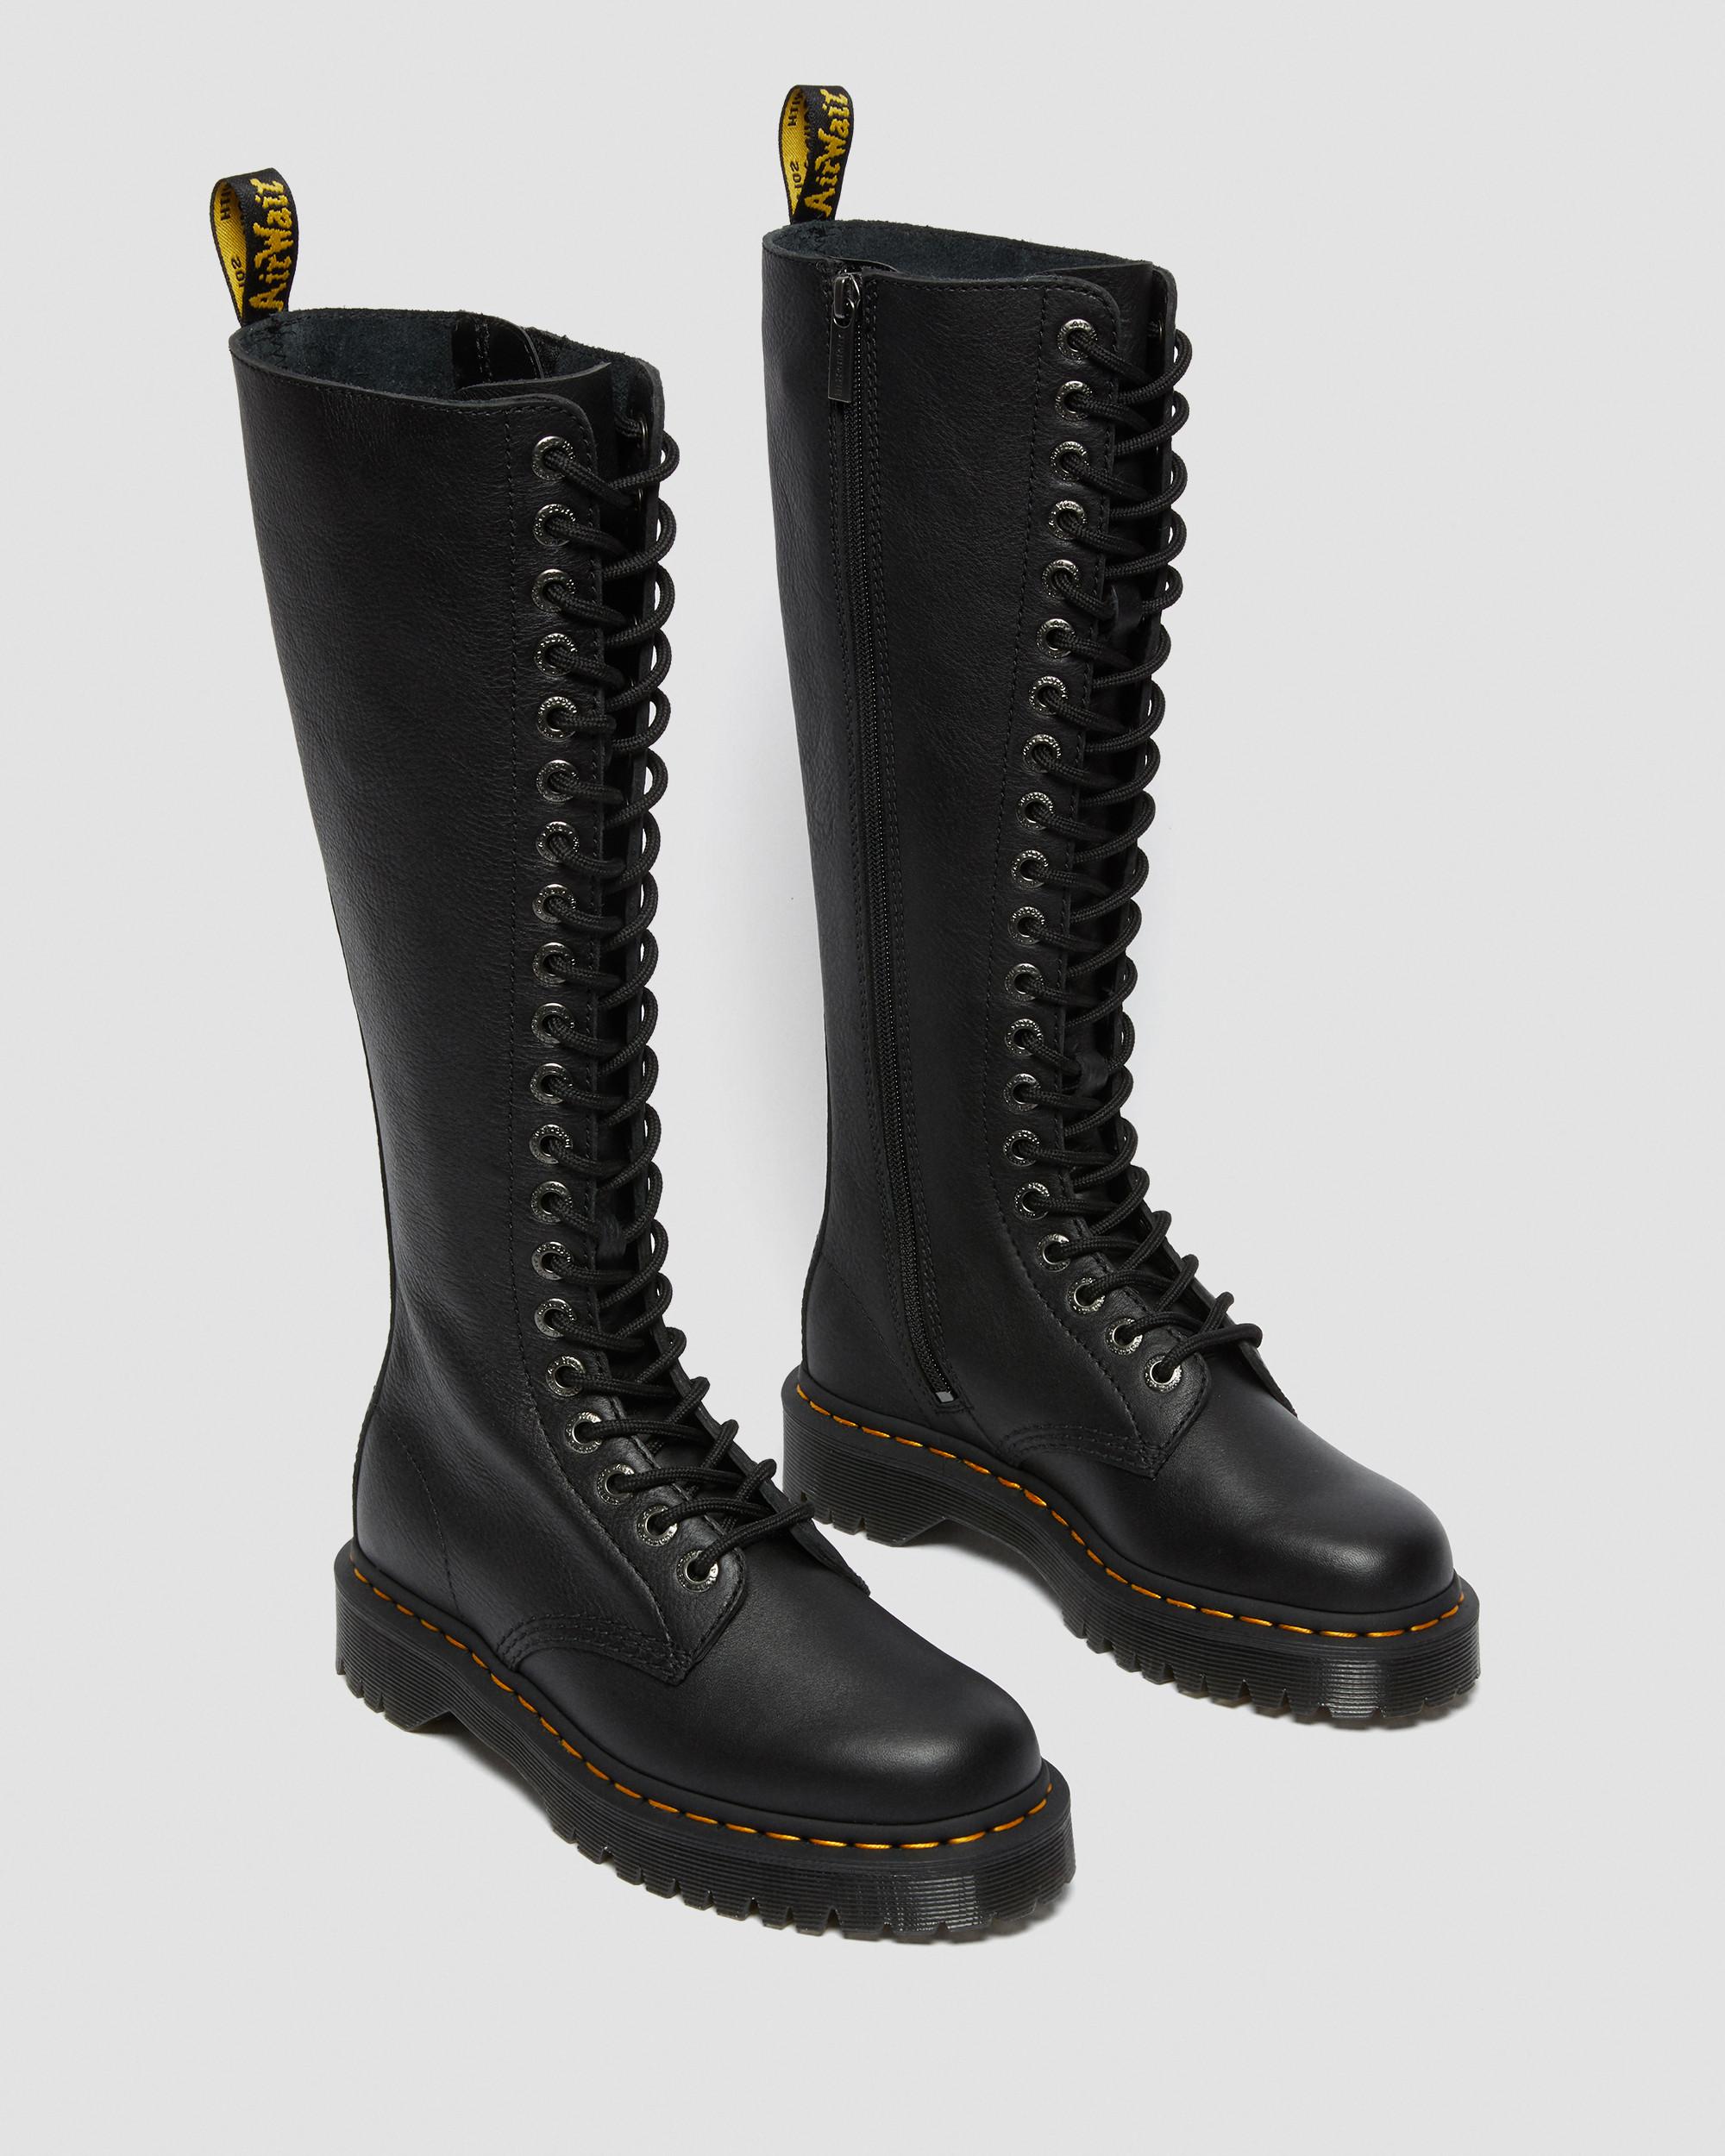 1B60 Bex Pisa Leather Knee High Boots | Dr. Martens